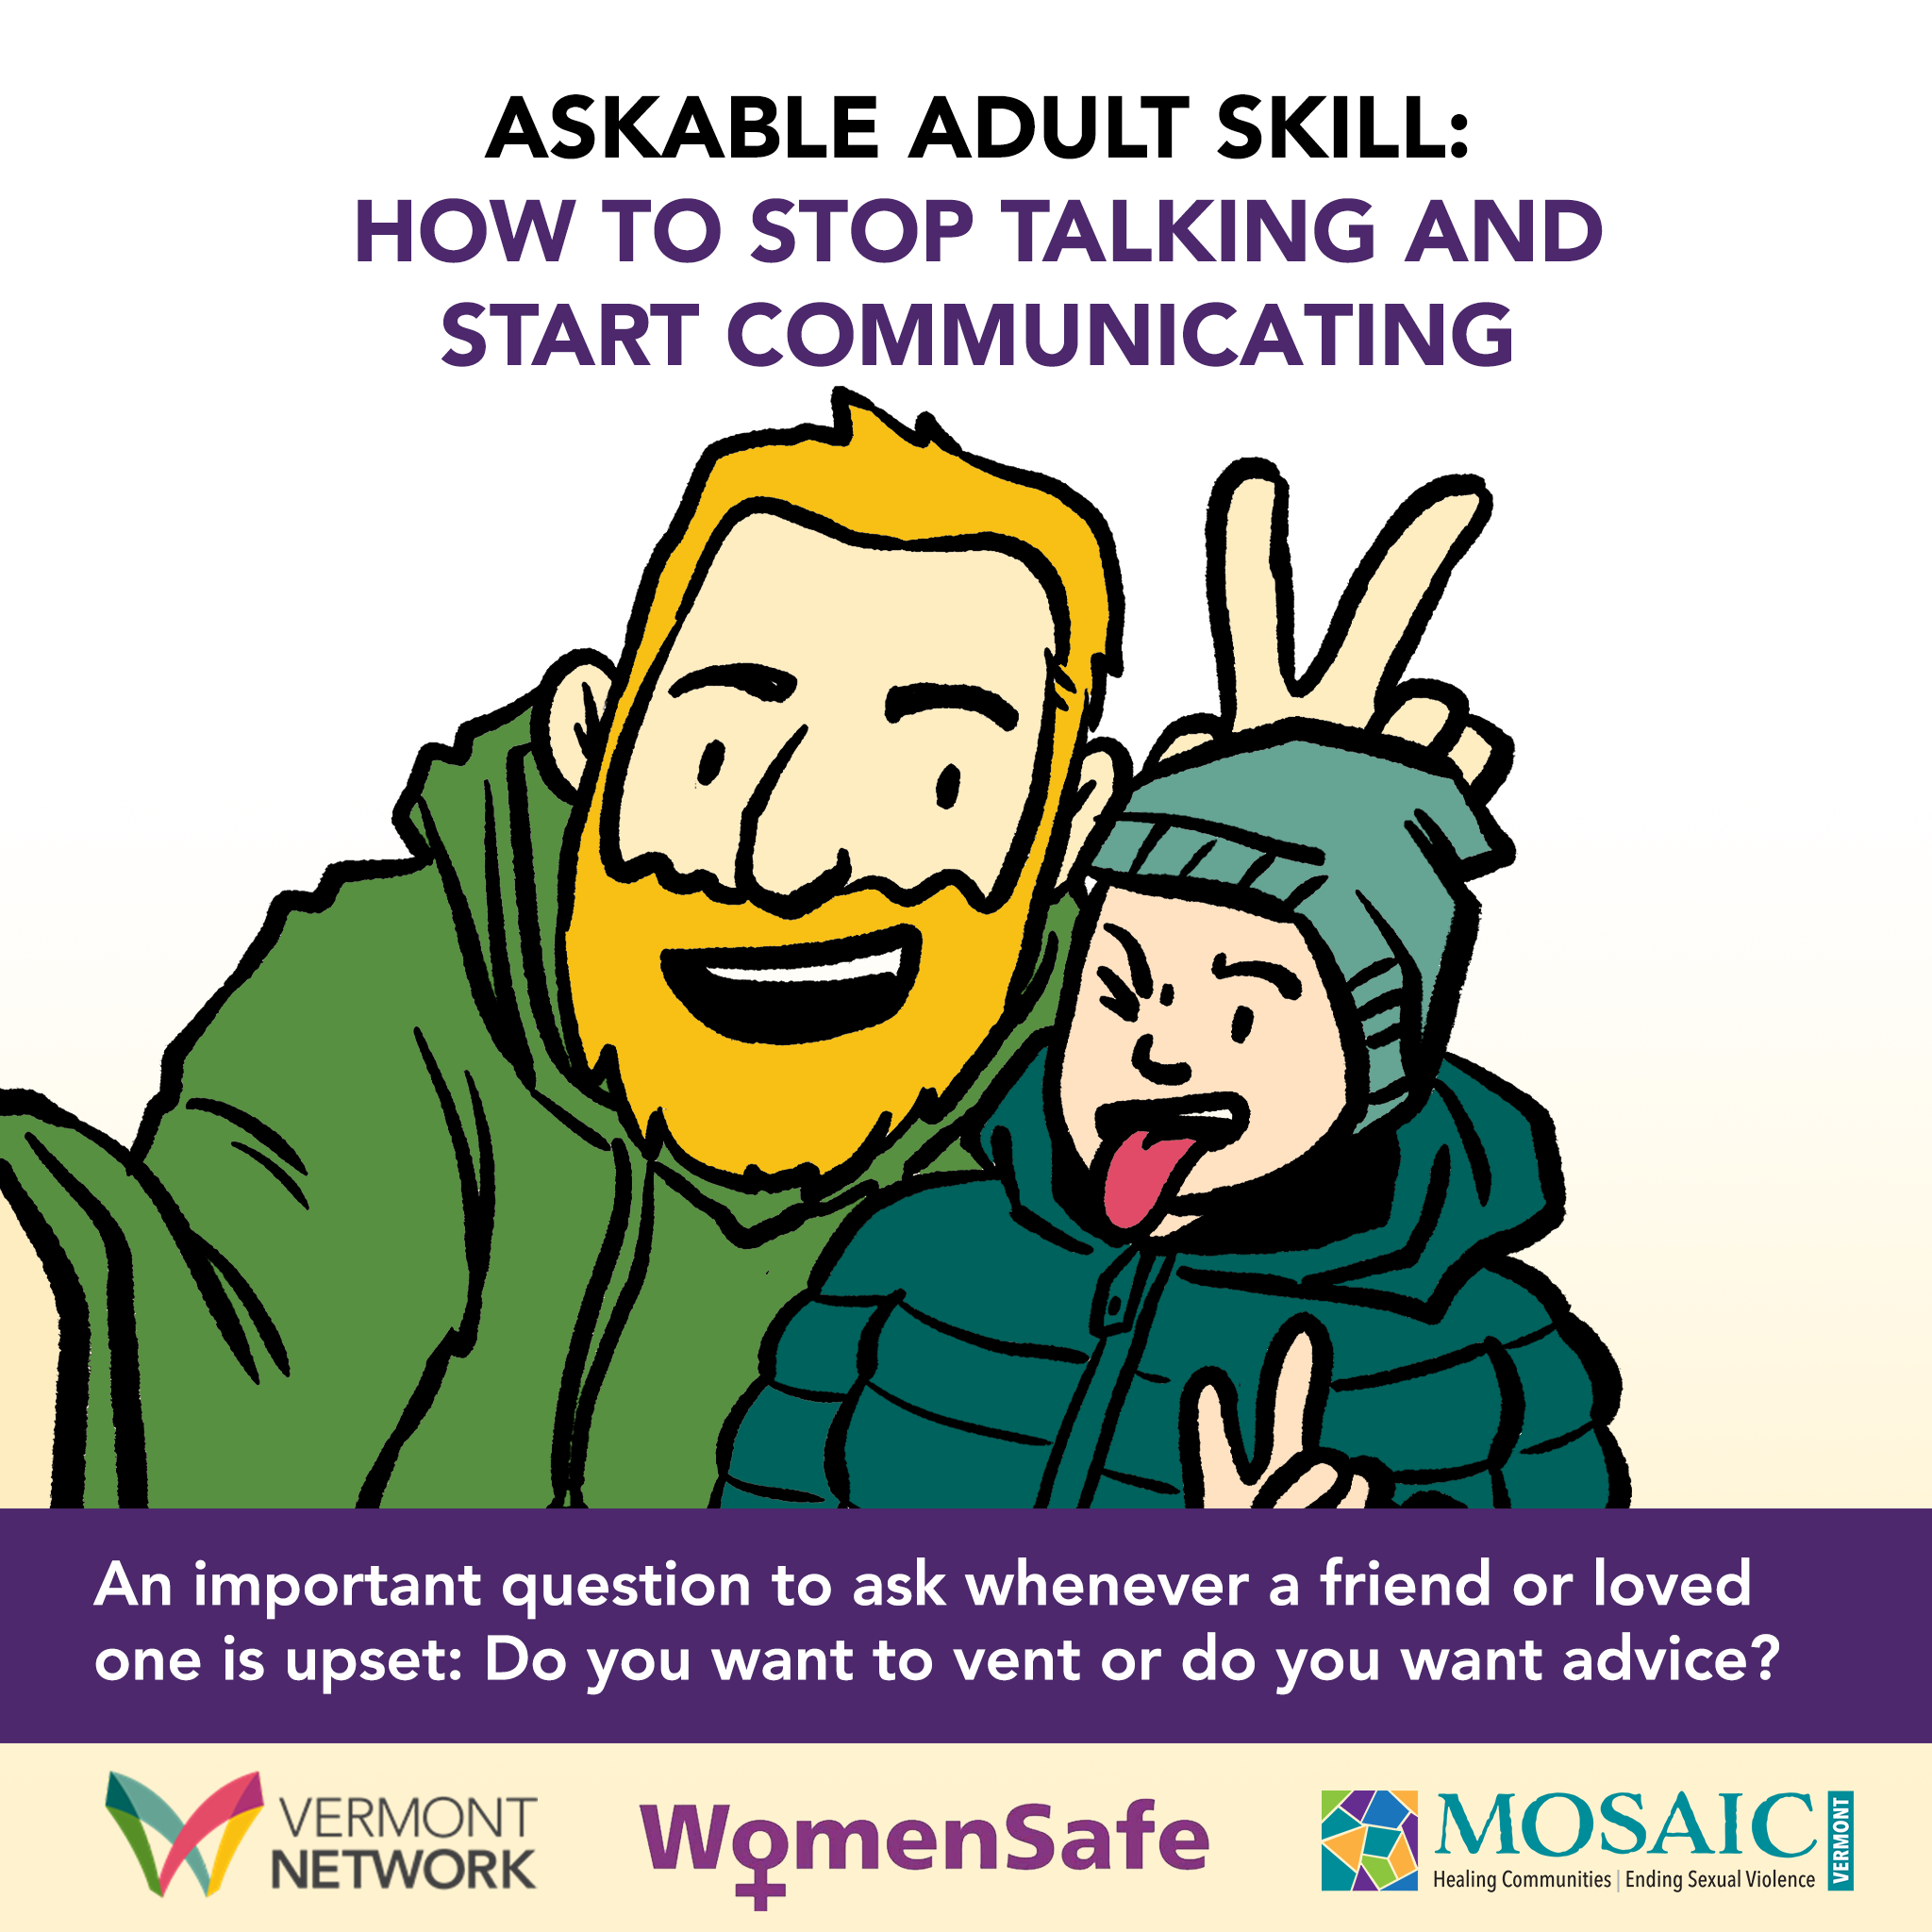 Illustration of an adult and a young person making funny faces for a selfie. Header says "Askable Adult Skill: How to stop talking and start communicating." Additional text says "An important question to ask whenever a friend or loved one is upset: 'Do you want to vent or do you want advice?'"